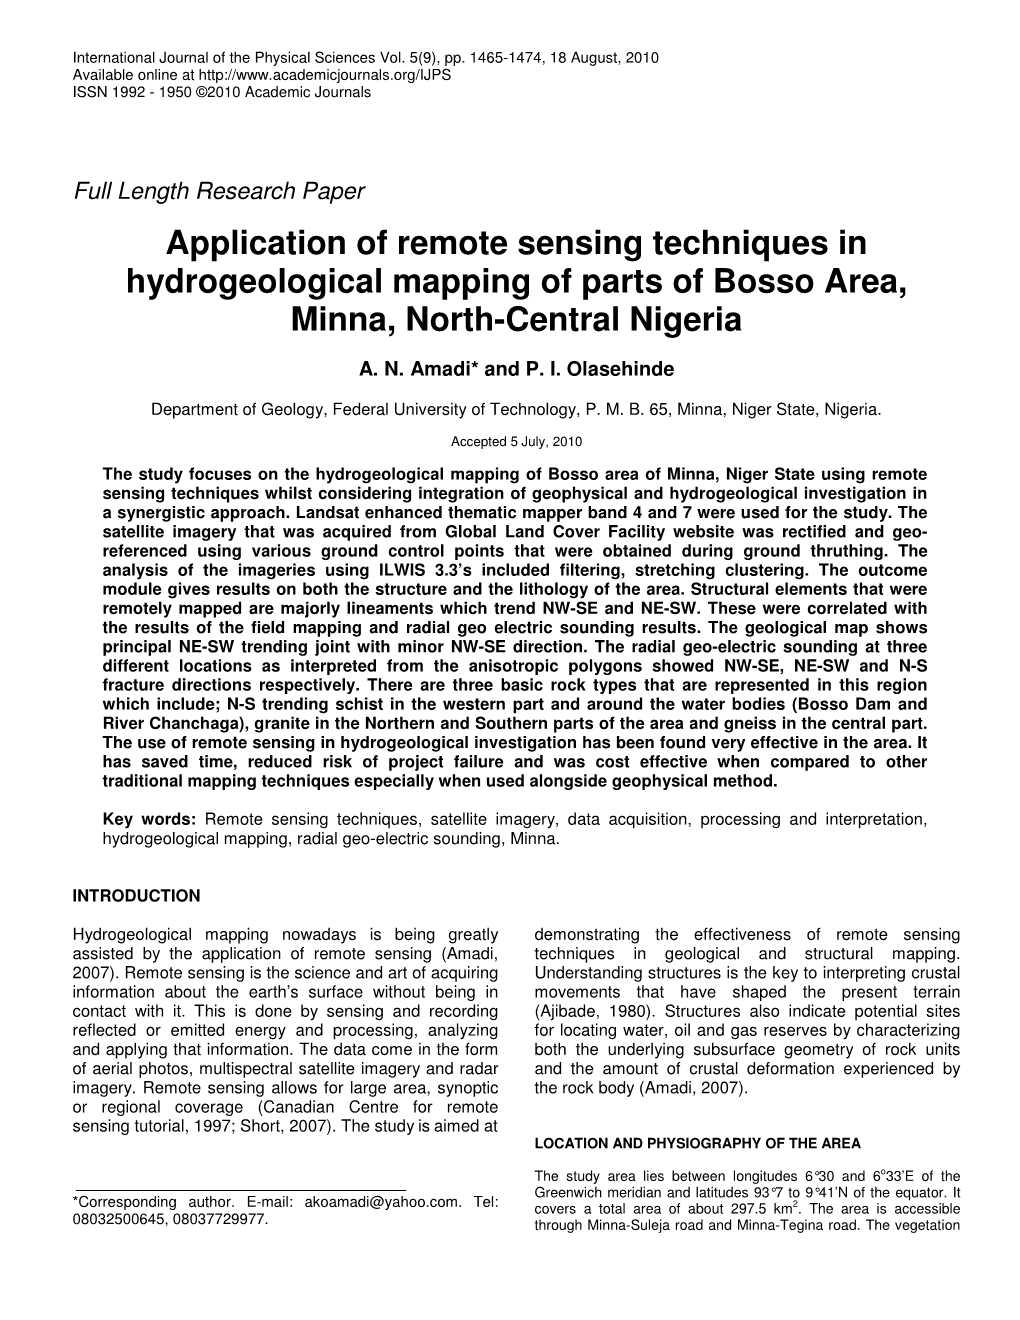 Application of Remote Sensing Techniques in Hydrogeological Mapping of Parts of Bosso Area, Minna, North-Central Nigeria